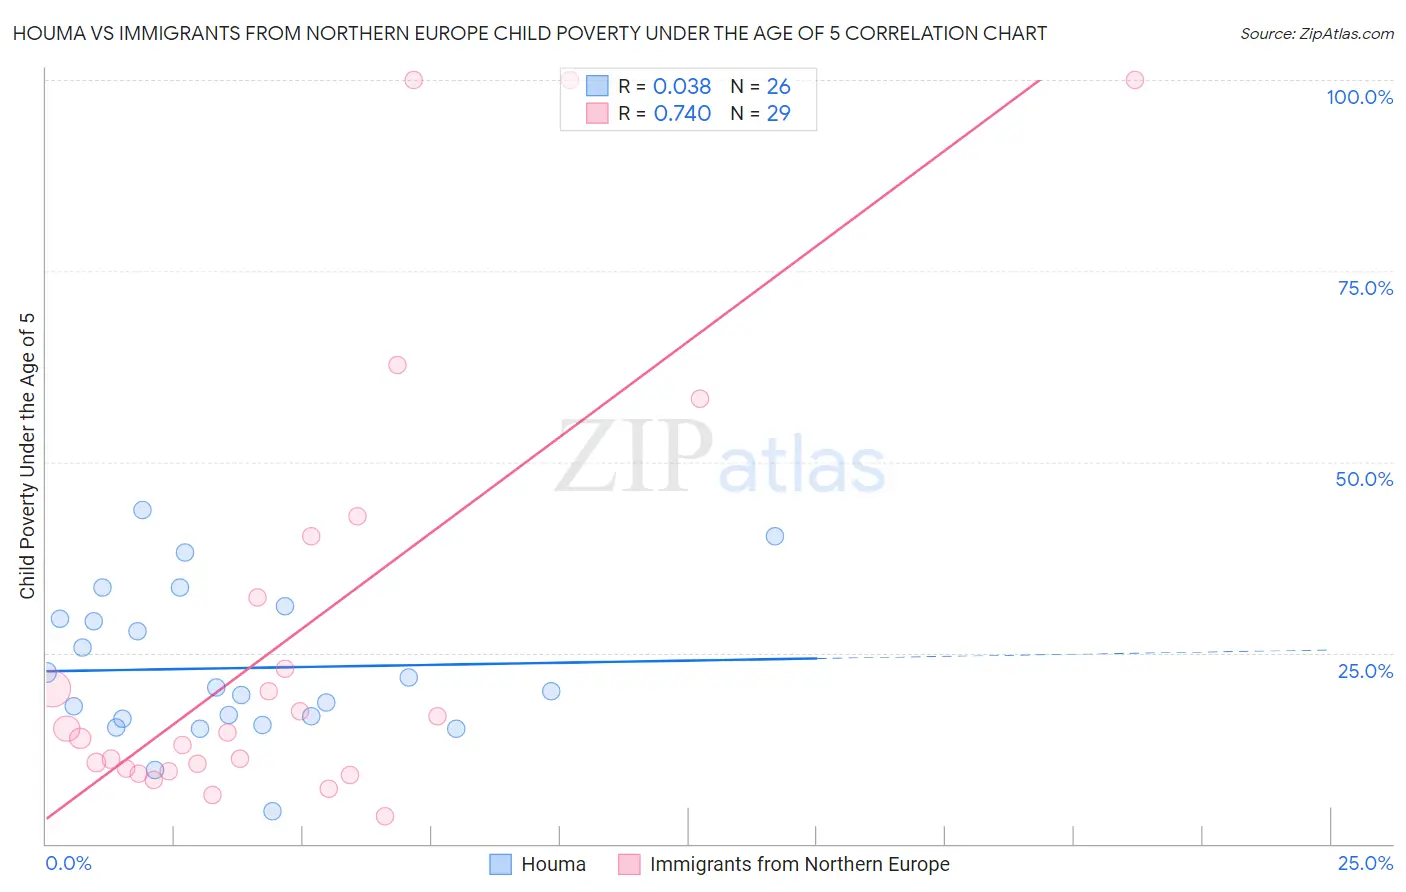 Houma vs Immigrants from Northern Europe Child Poverty Under the Age of 5